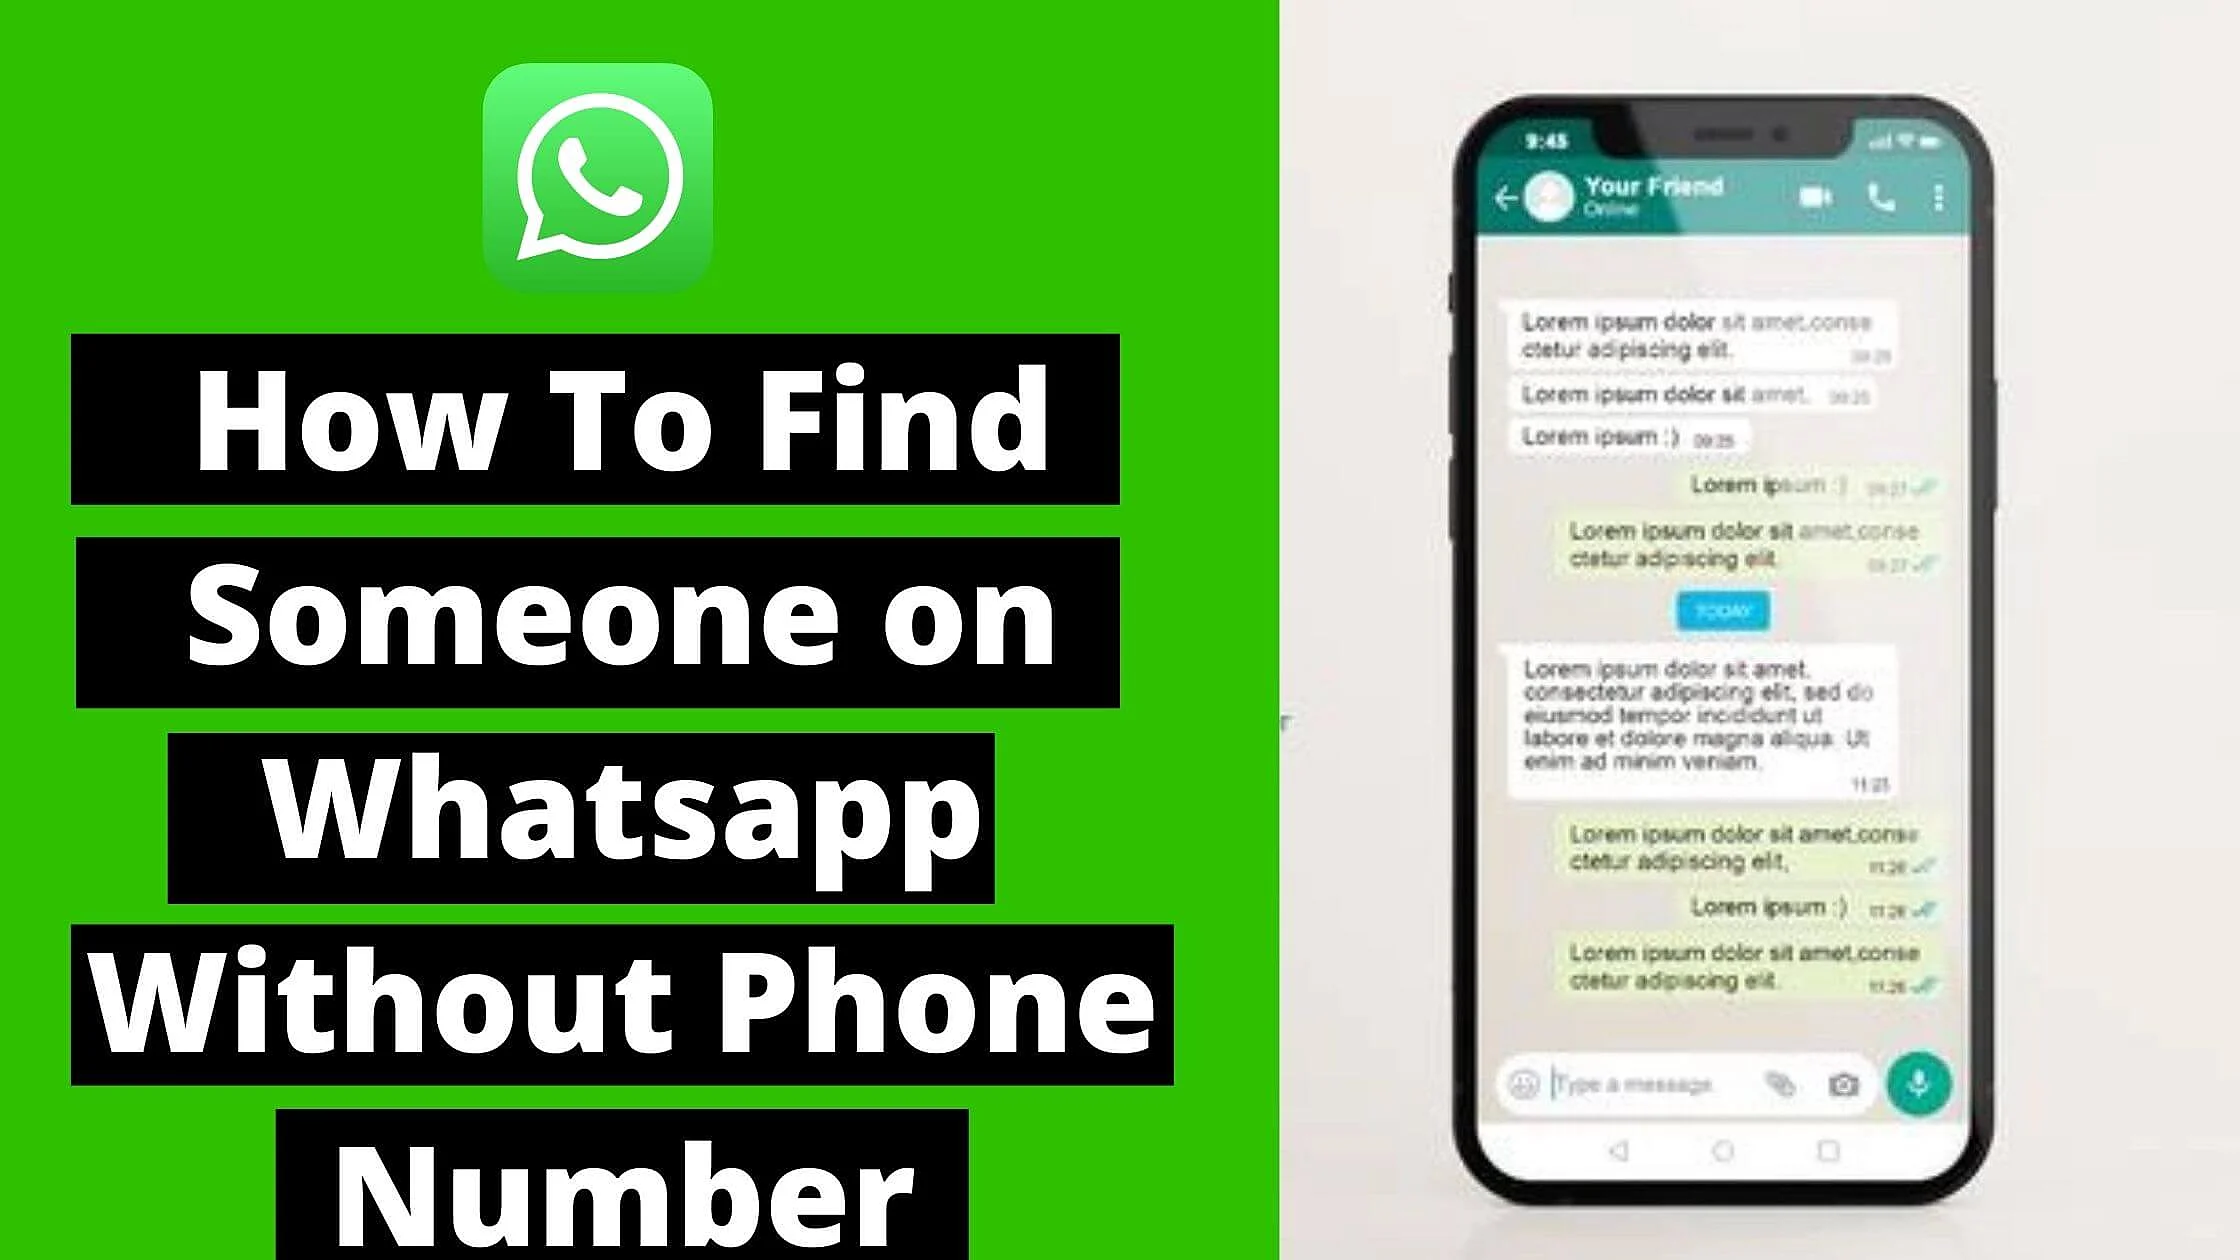 How To Find Someone on Whatsapp Without Phone Number